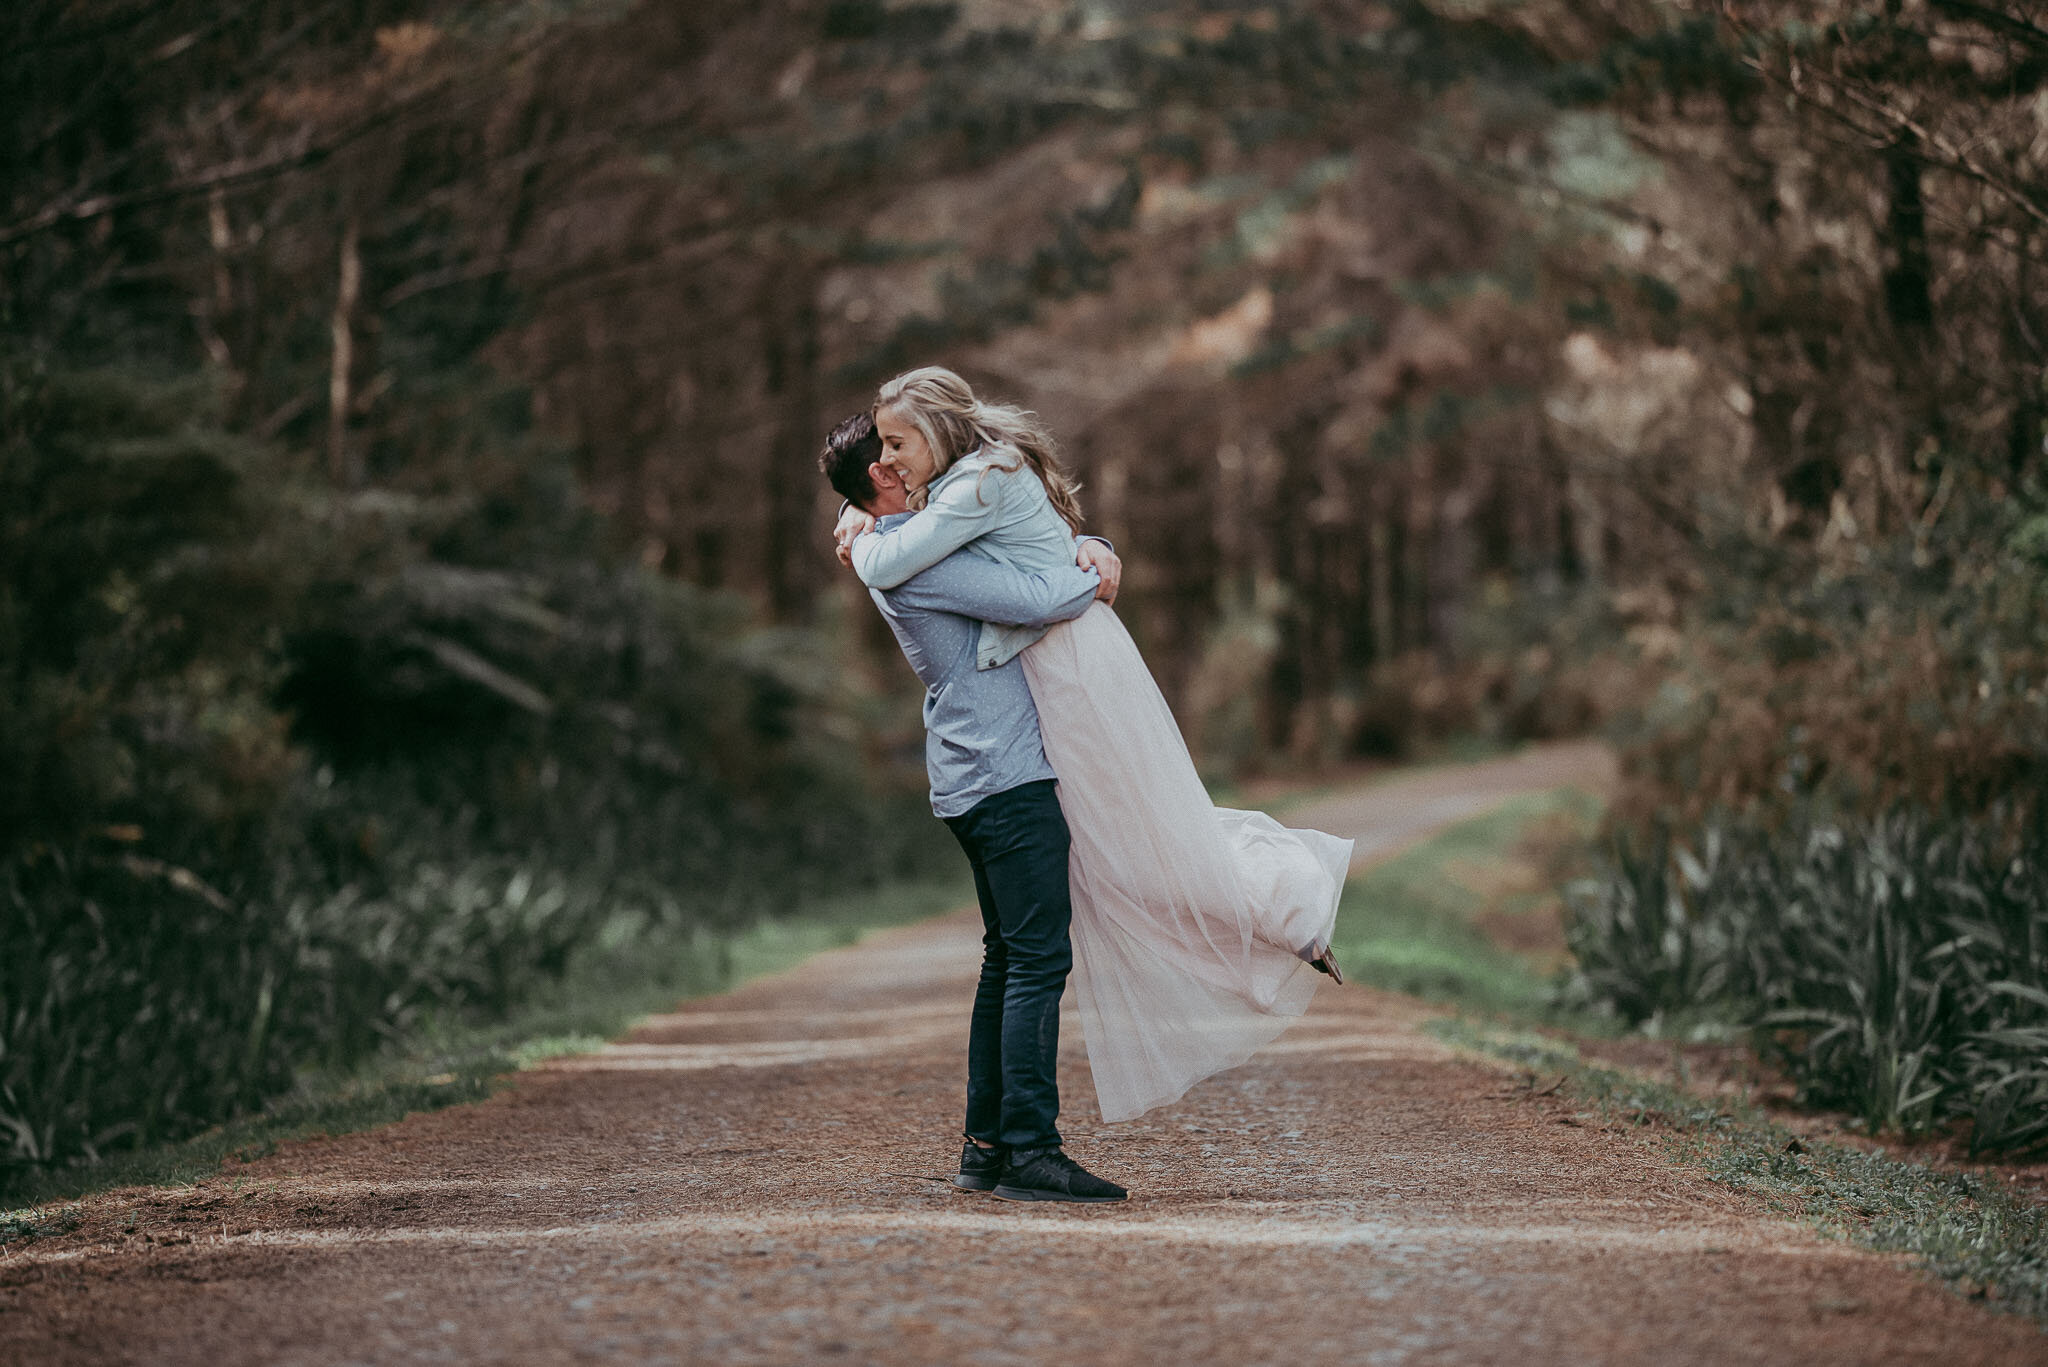 Workshop for photographers in Auckland done {New Zealand wedding photographer}